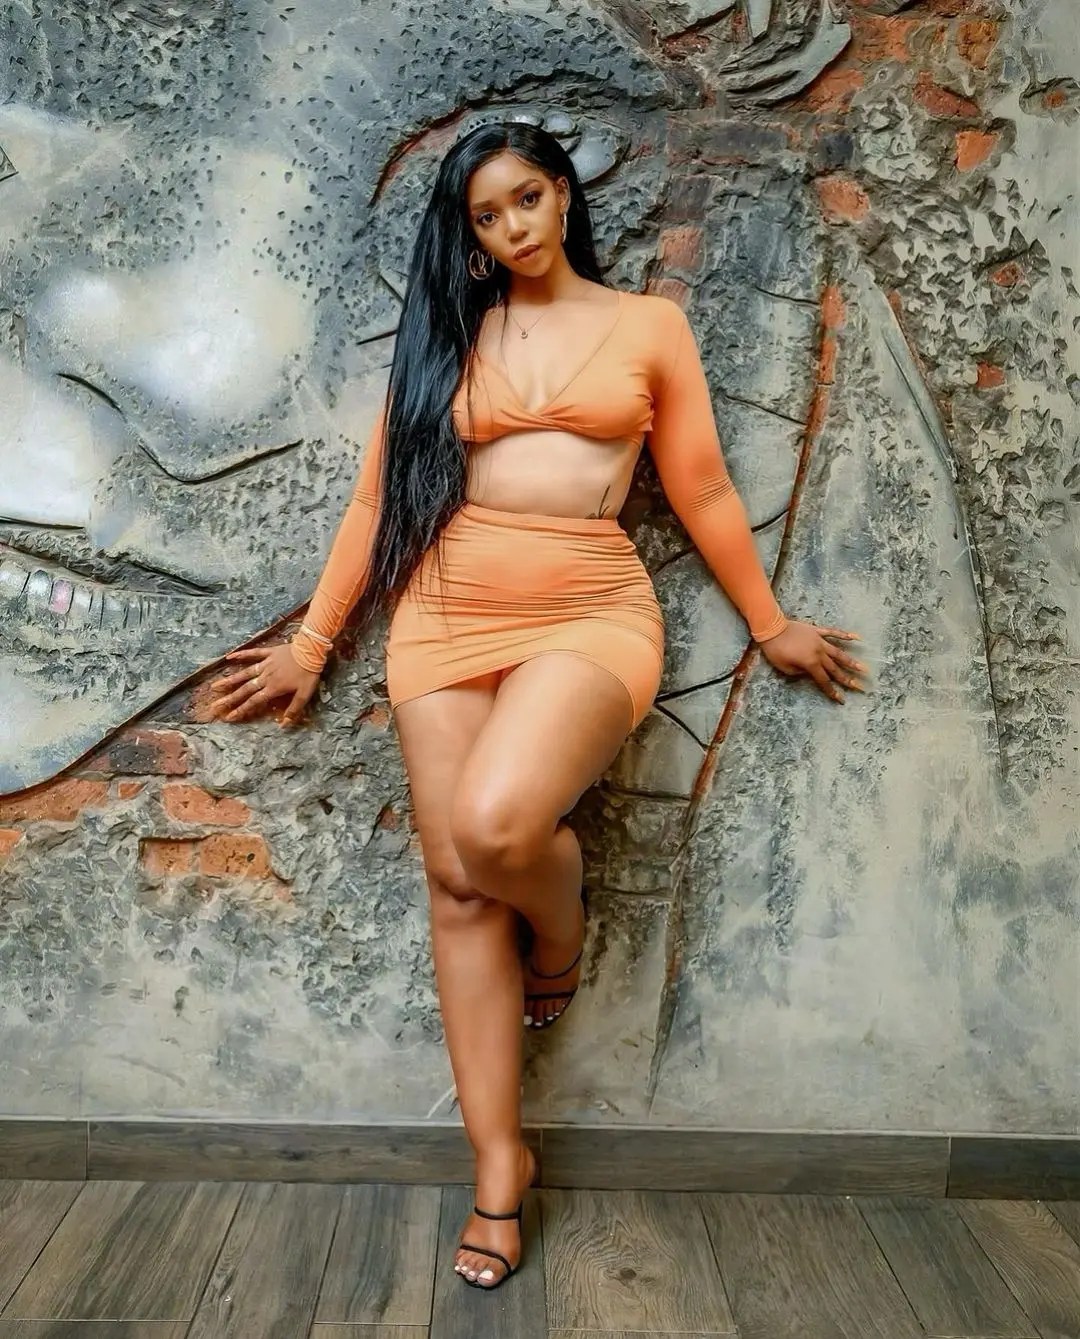 Influencer Kim Kholiwe receives new car from her baby daddy – Photos